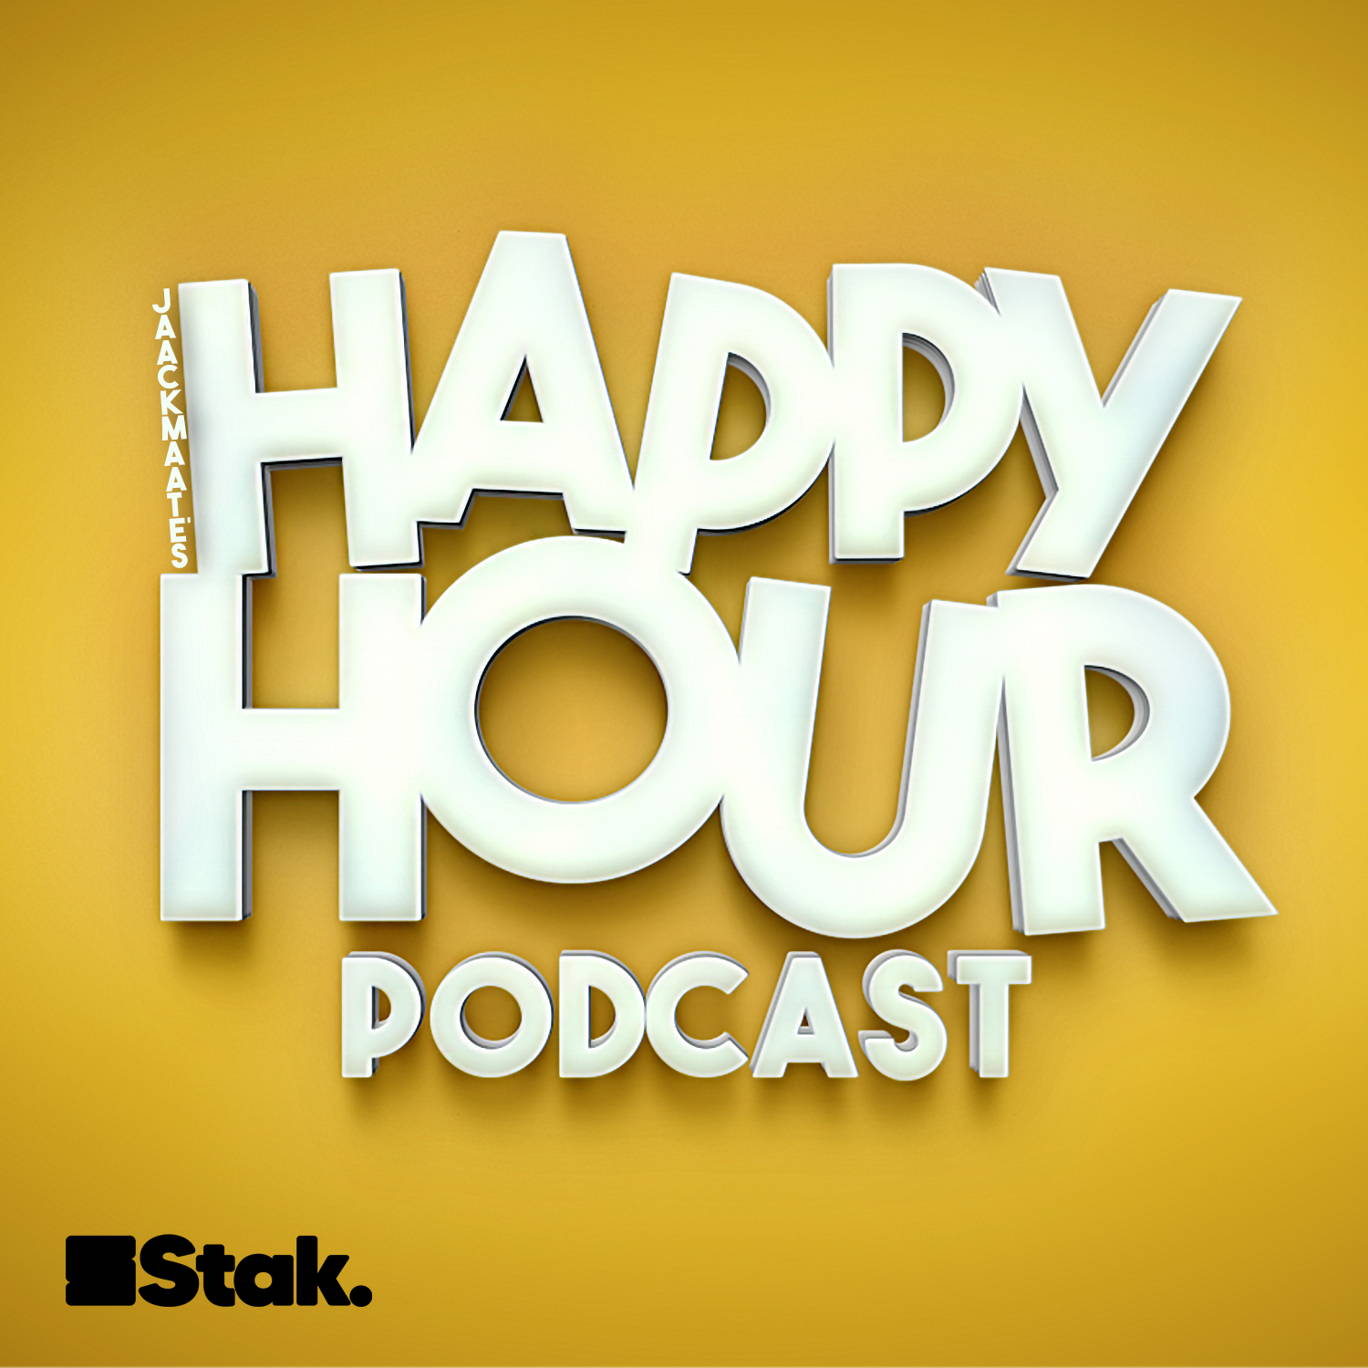 The artwork for the JaackMaate’s Happy Hour podcast.